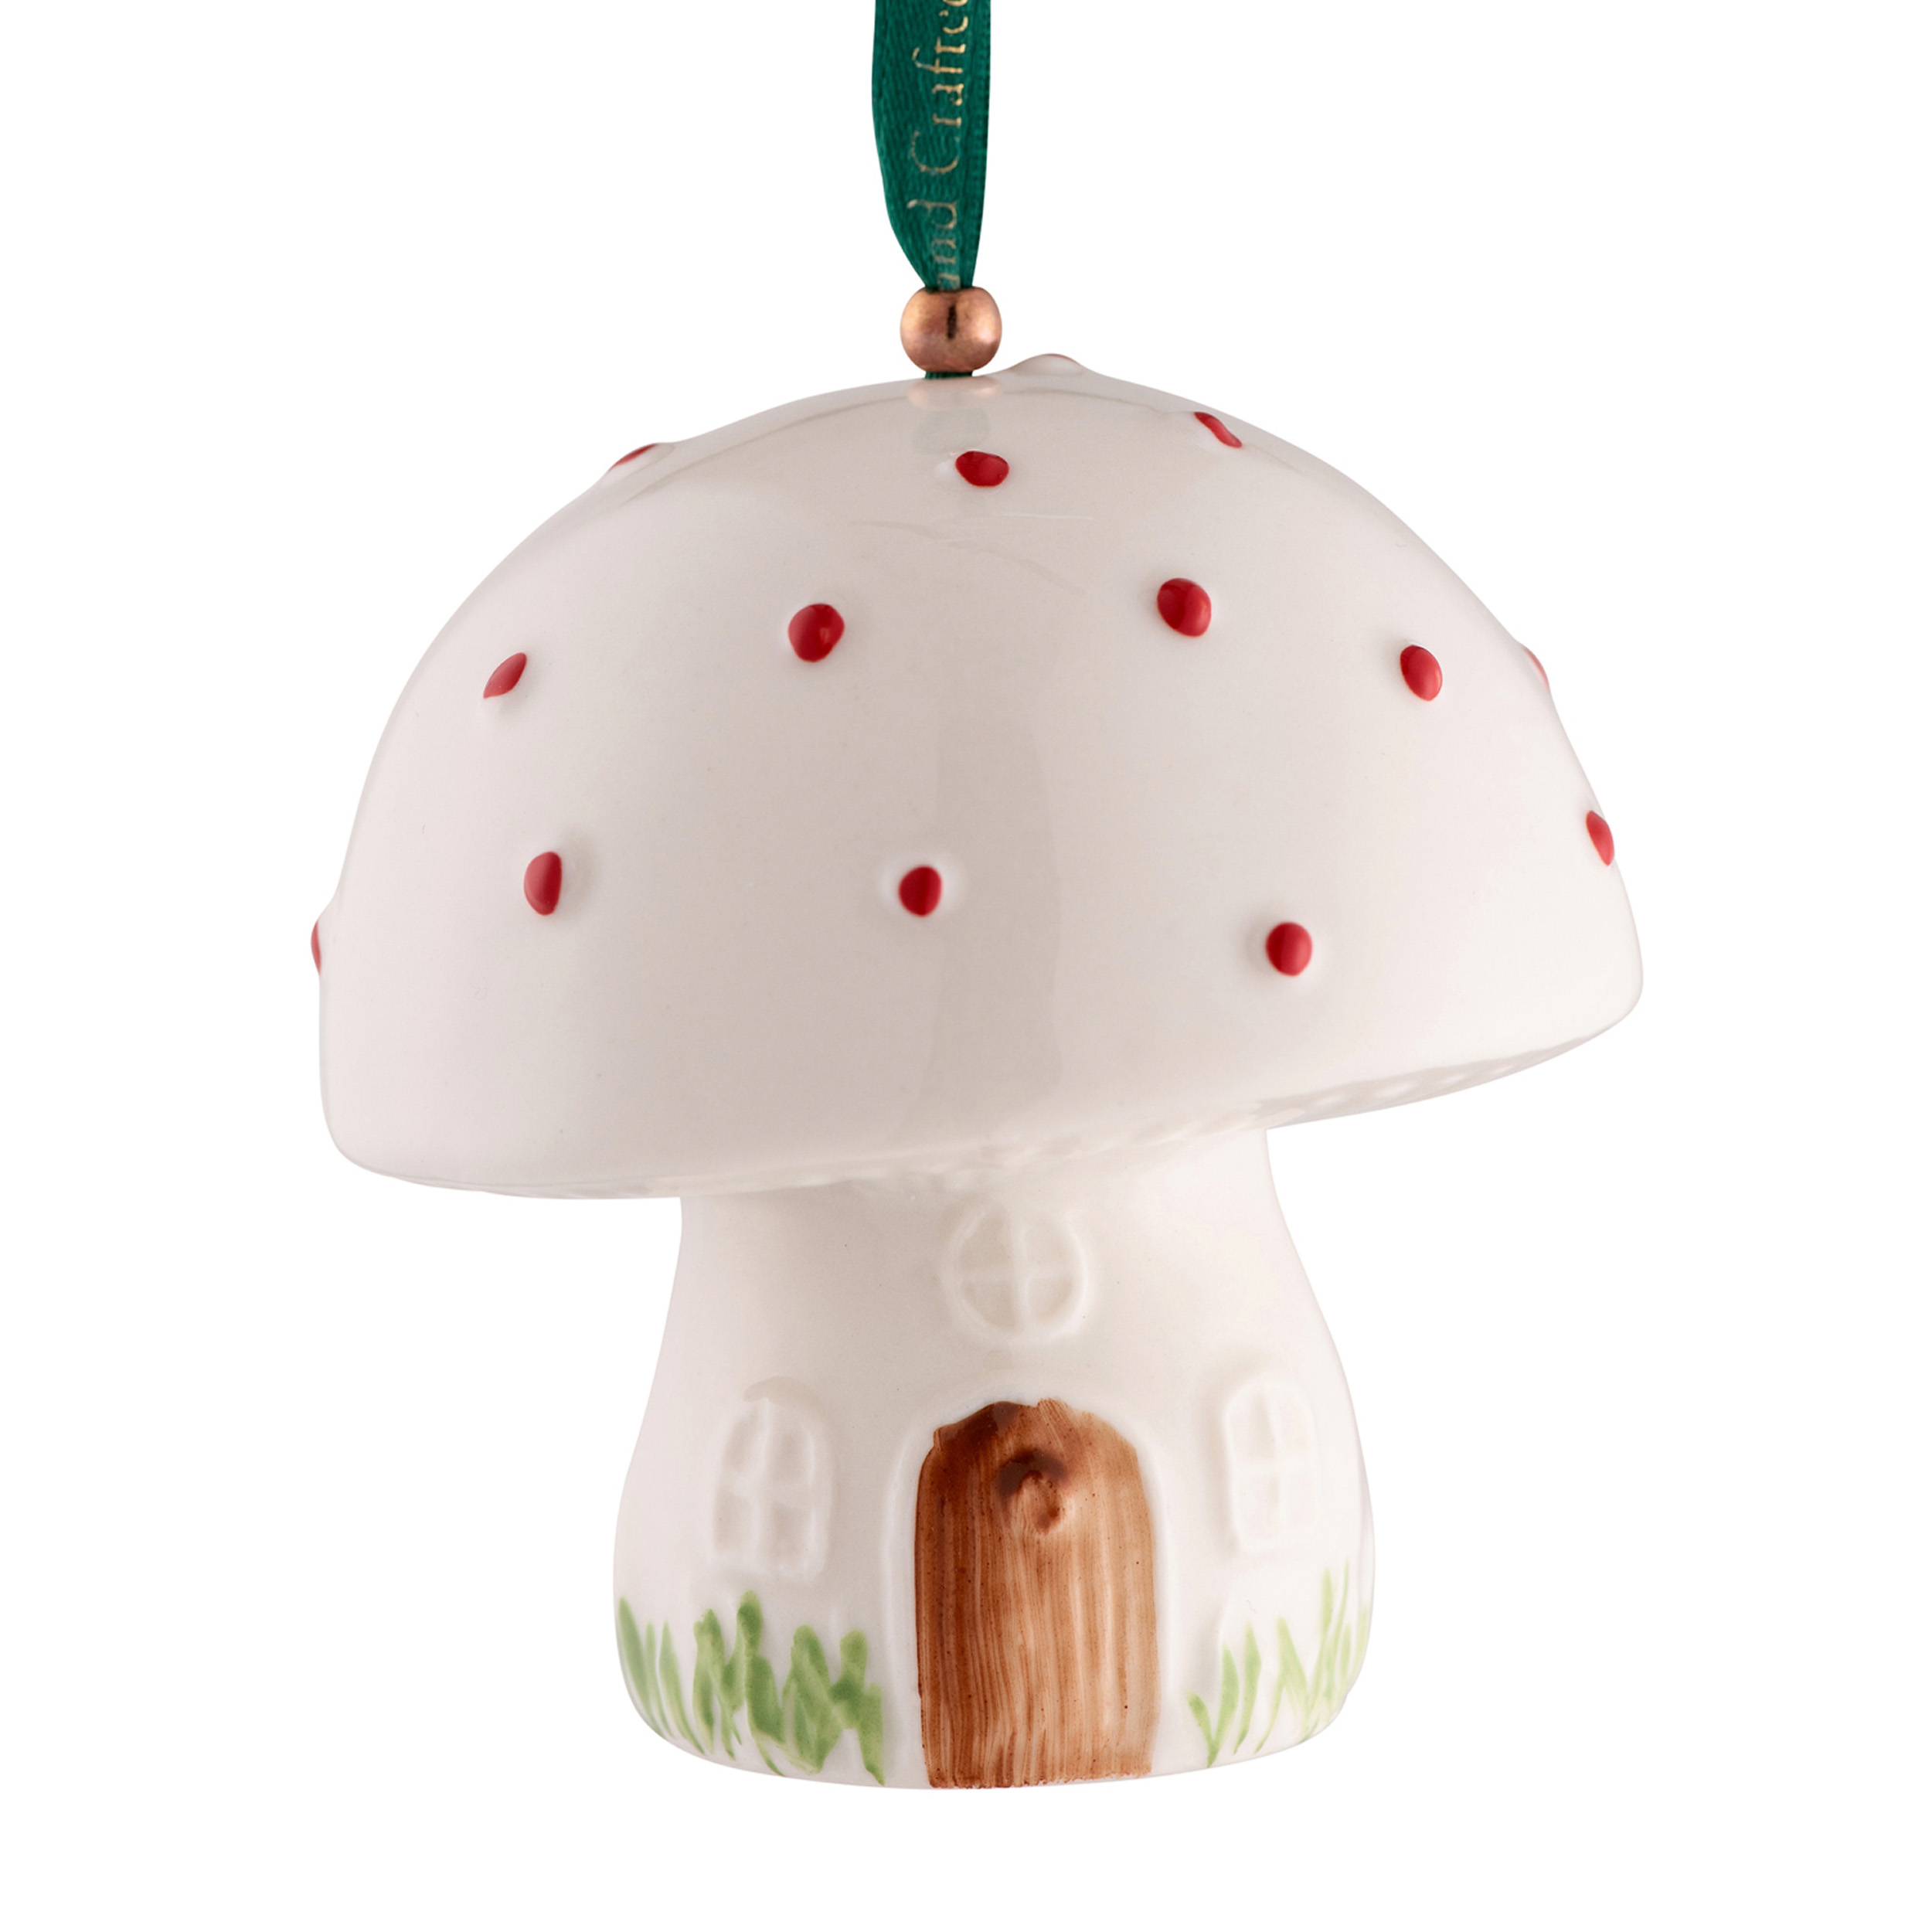 Product image for Irish Christmas | Belleek Pottery Toadstool Ornament